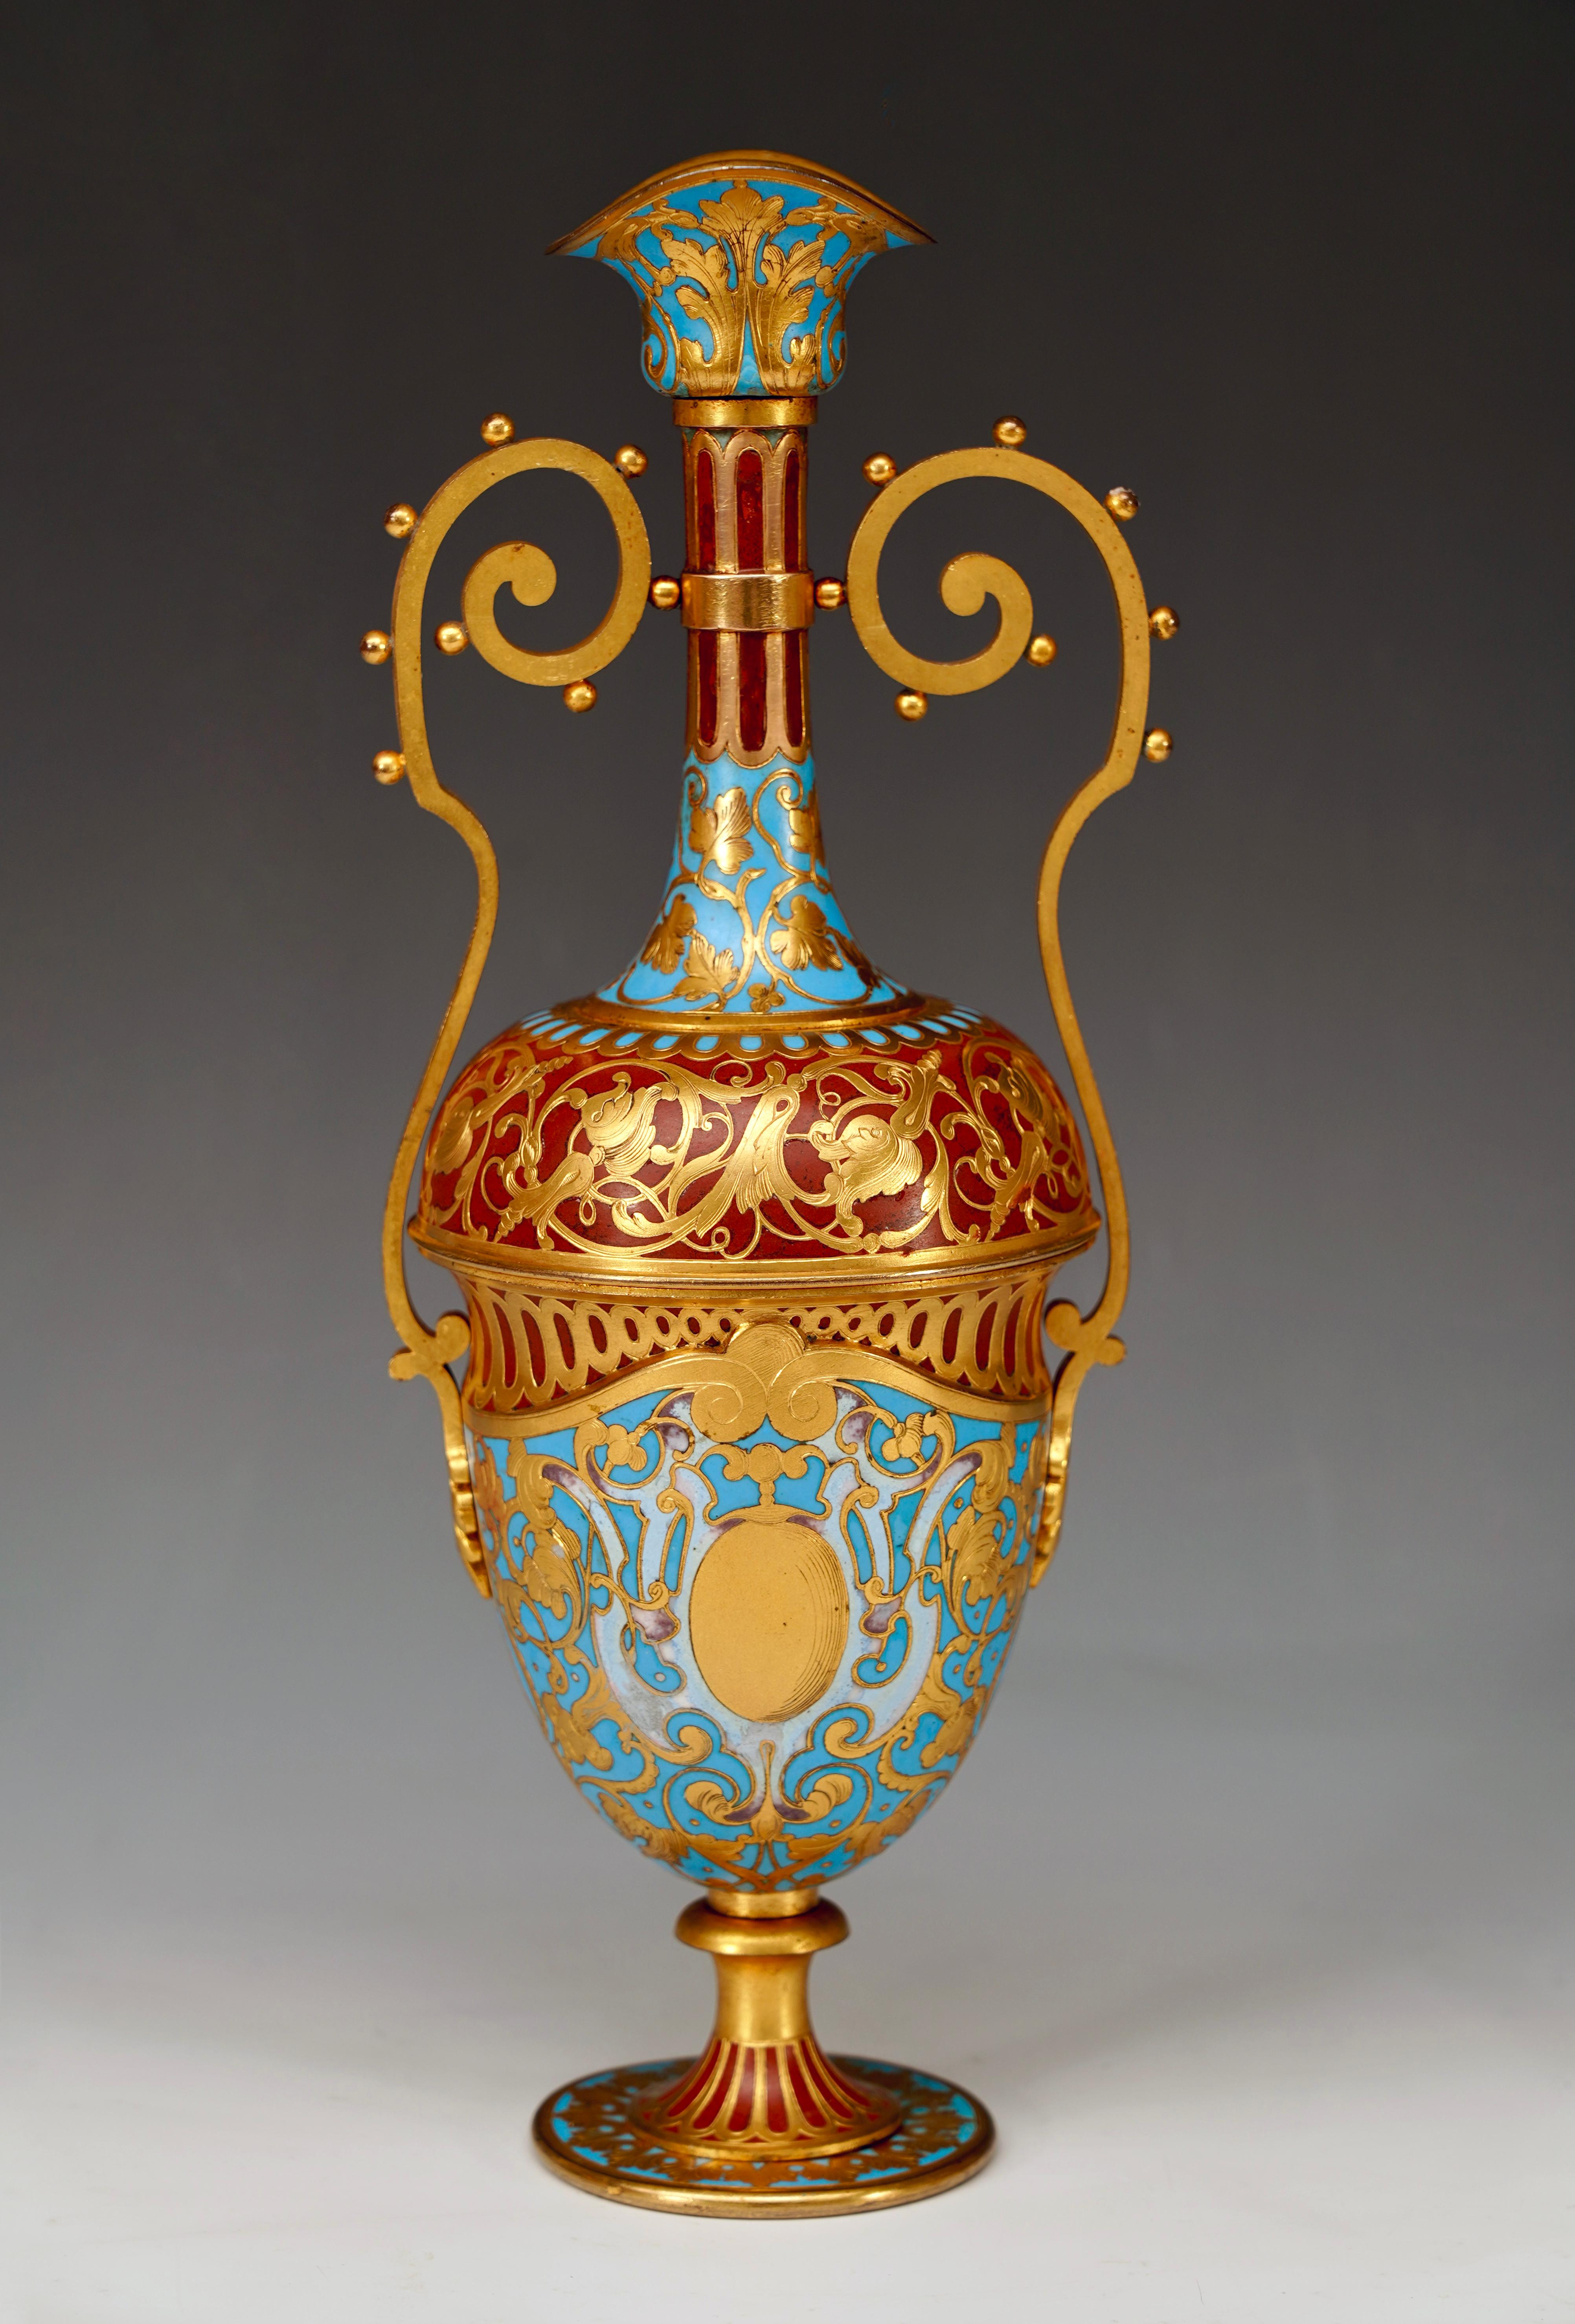 Signed F. Barbedienne & Cie

Height : 31,5 cm (12,4 in.) ; Width : 12 cm (4,7 in.) ; Depth : 10,5 cm (4,1 in.)

Charming baluster-shaped ewer in gilded bronze decorated with red and blue polychrome cloisonné enamel. Two beaded handles connect the